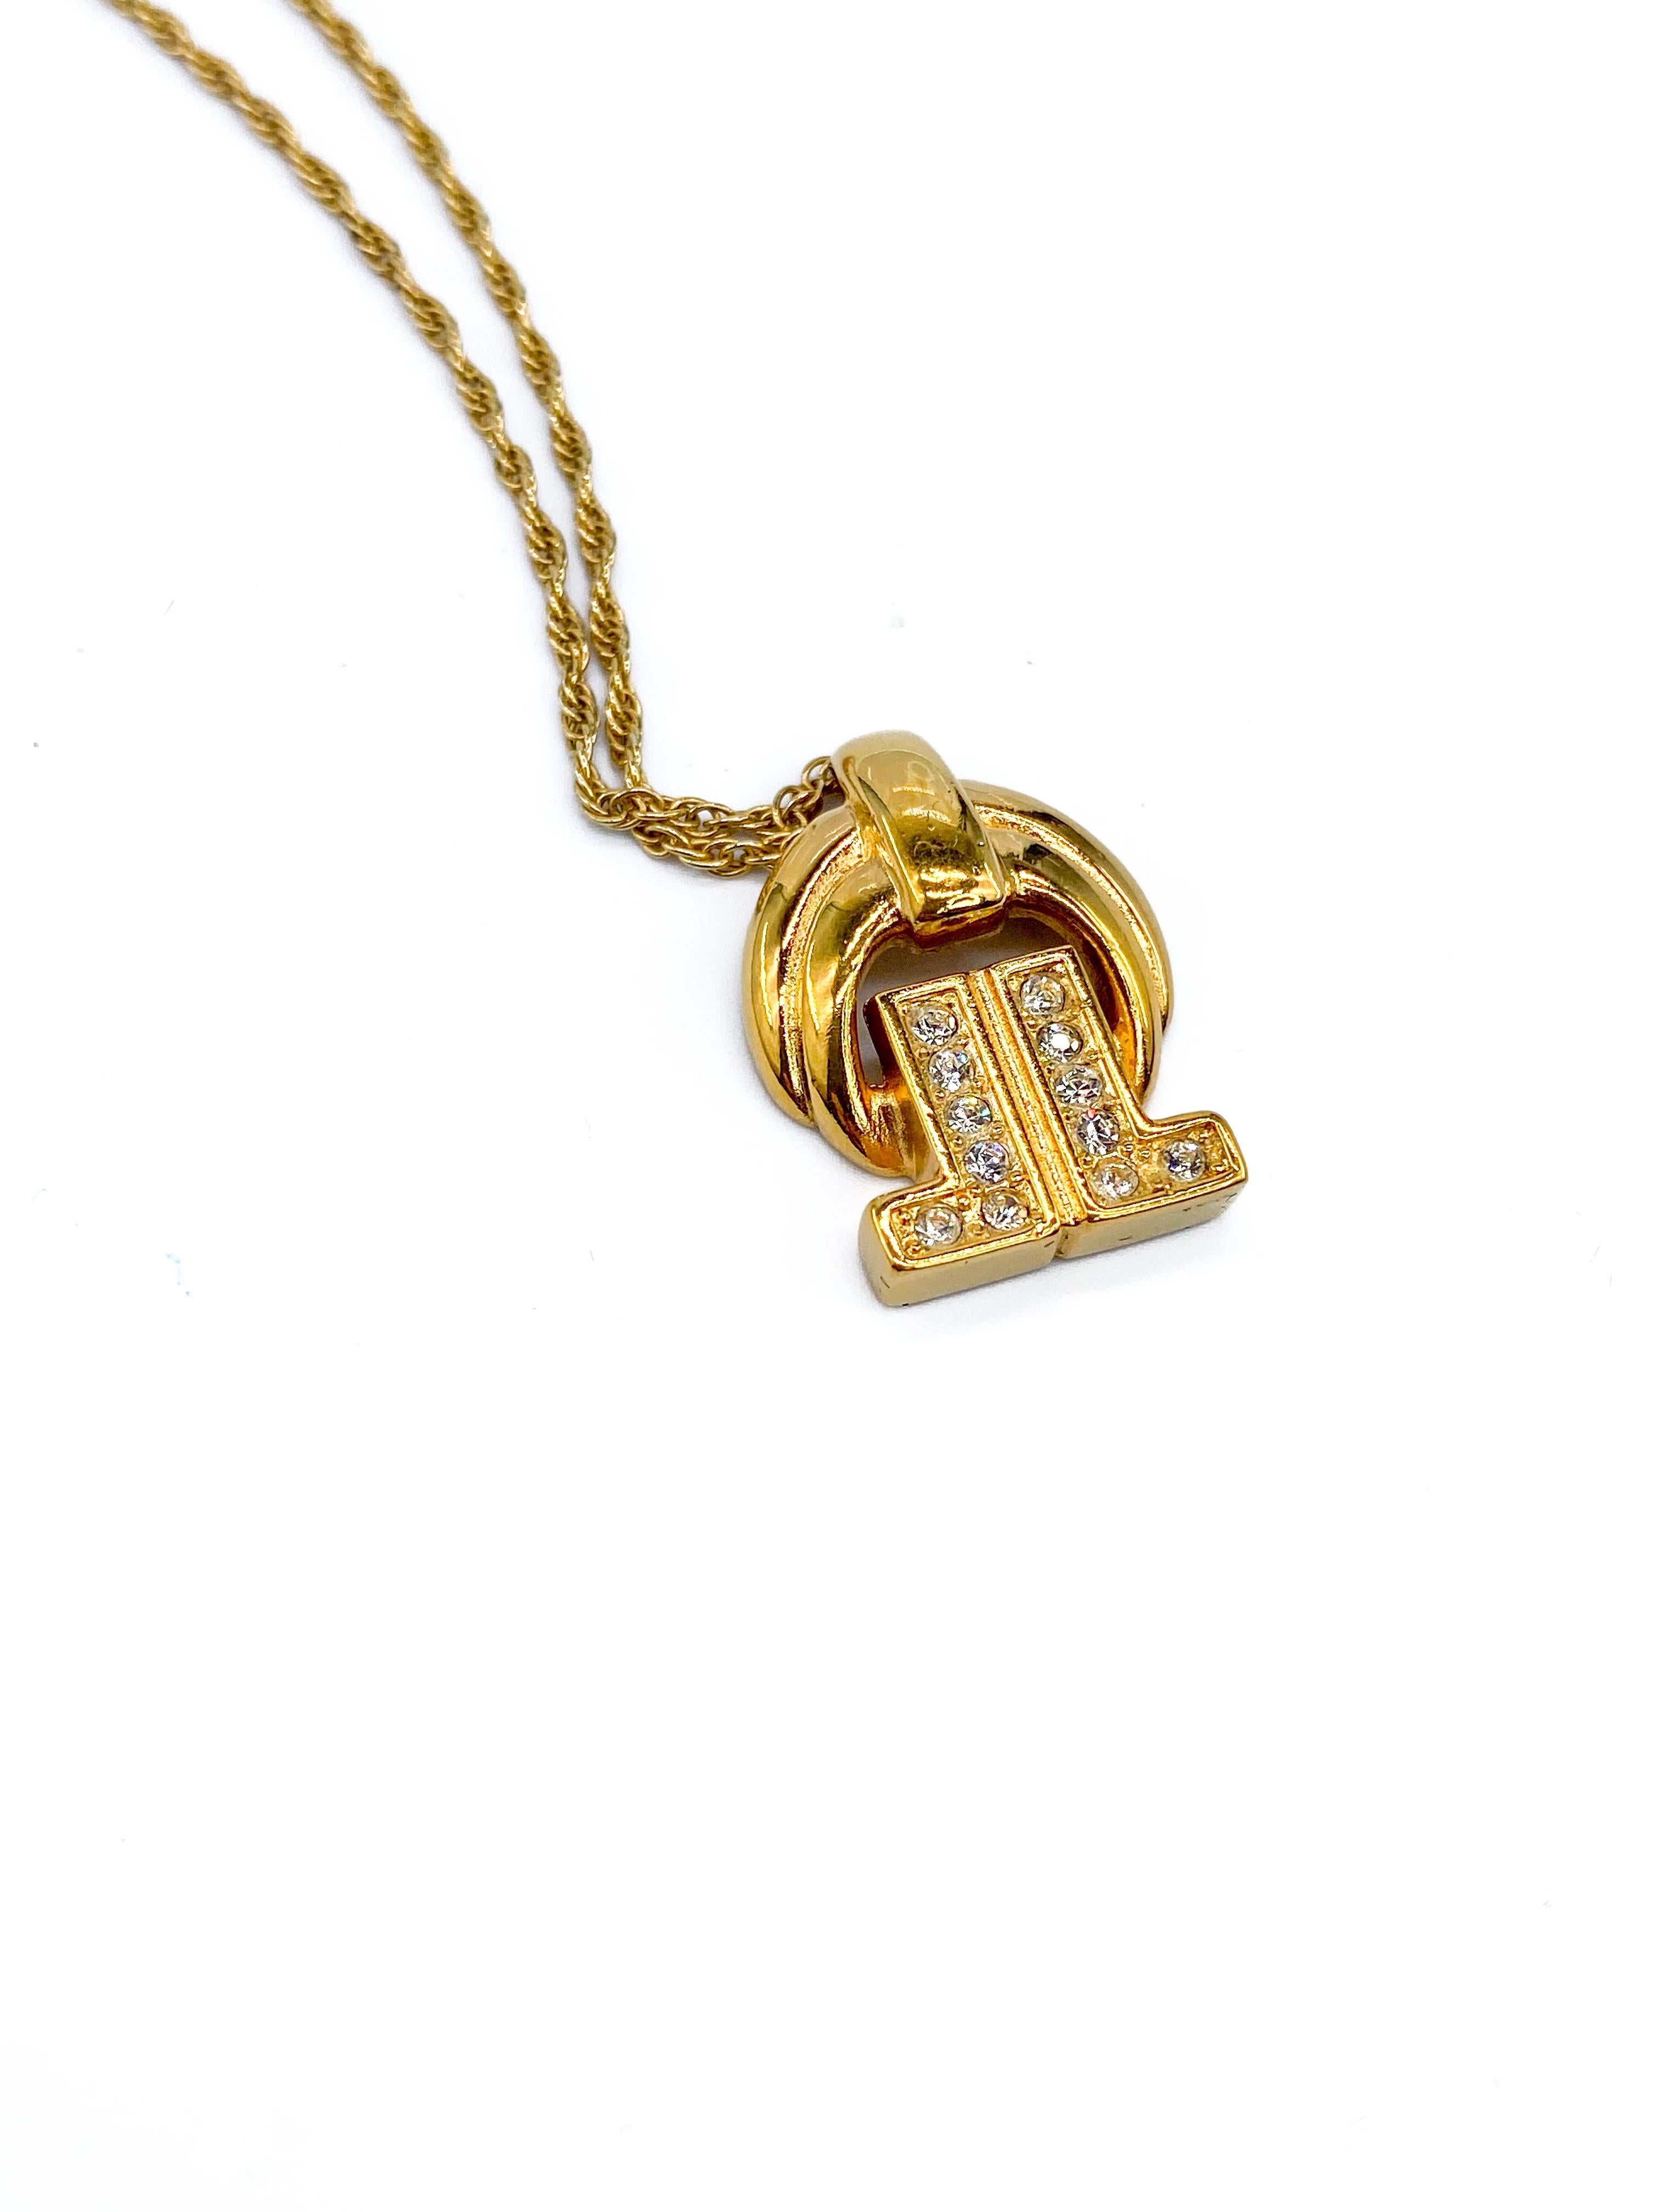 Lanvin 1970s Vintage Necklace. 

Beautifully delicate pendant from the Lanvin 70s archive, featuring the classic 1970s double L logo

Detail
-Crafted from a high quality gold plated base metal
-Delicate rope style chain
-Double L logo set with tiny